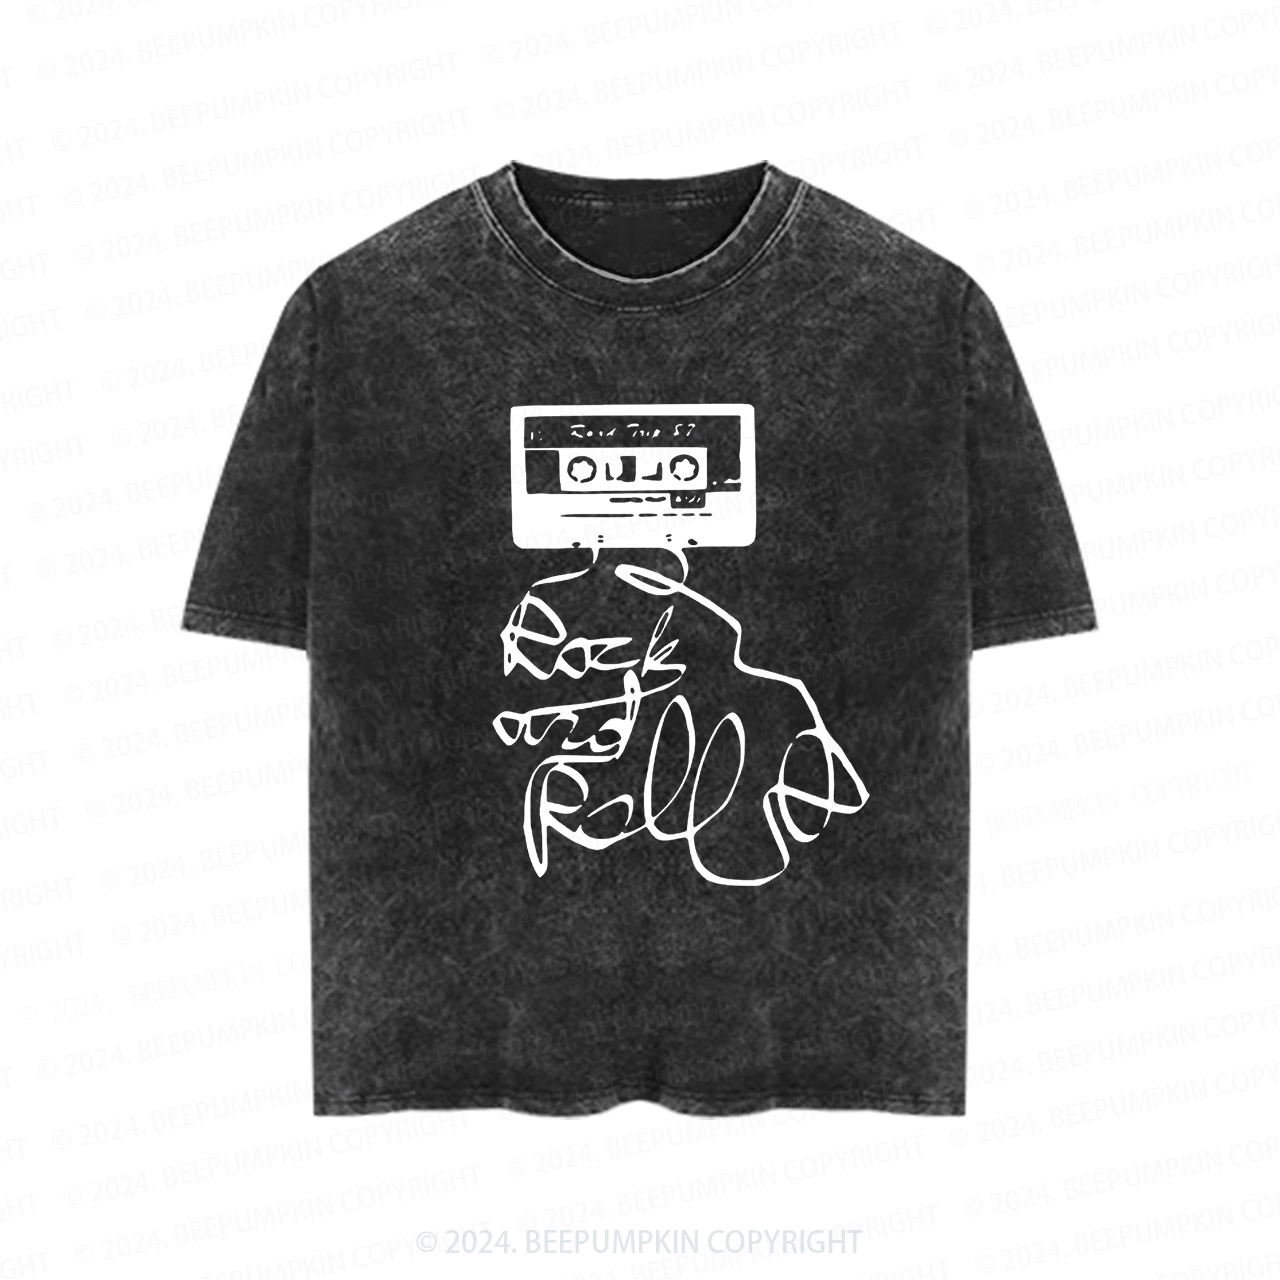 Cassette Tape Toddler&Kids Washed Tees         